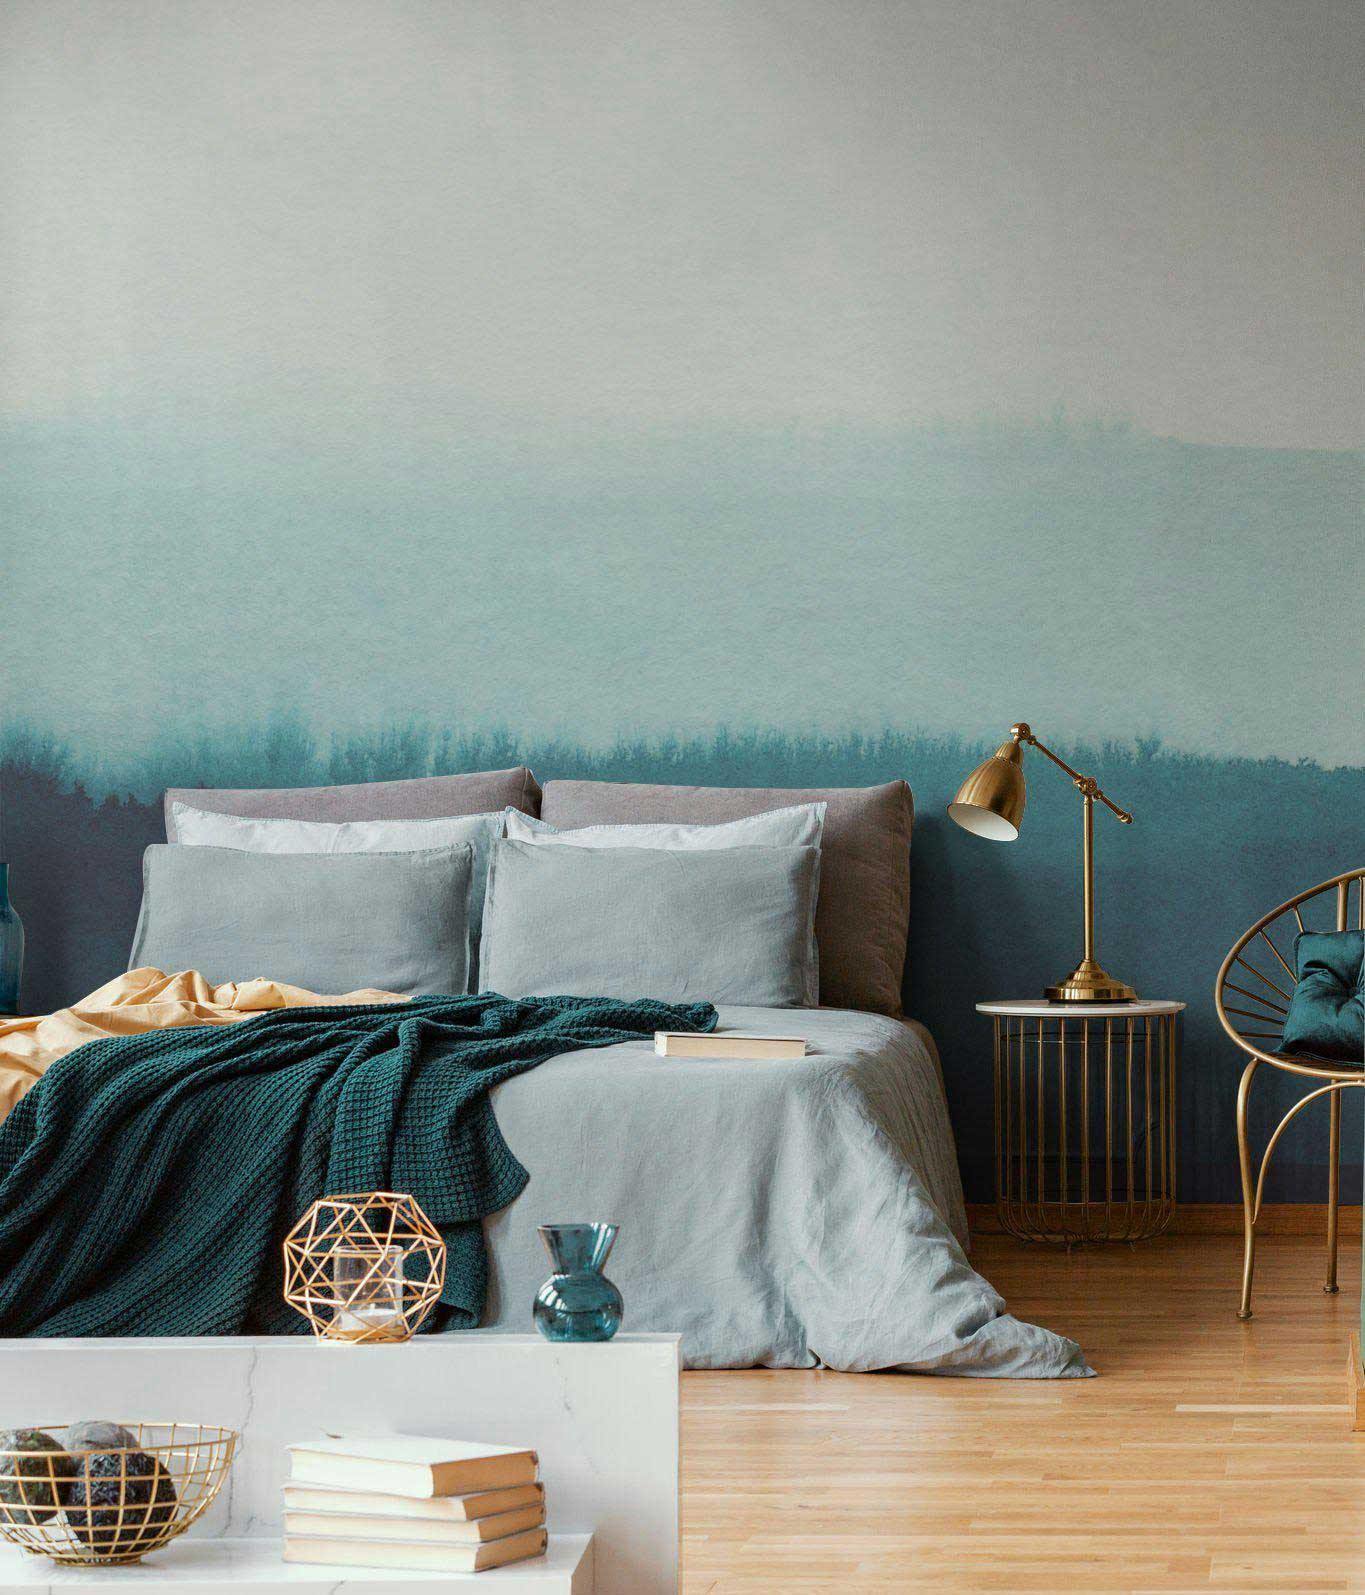 Bedroom interior featuring the 'Backwoods Color Block Wall Mural' and wooden flooring